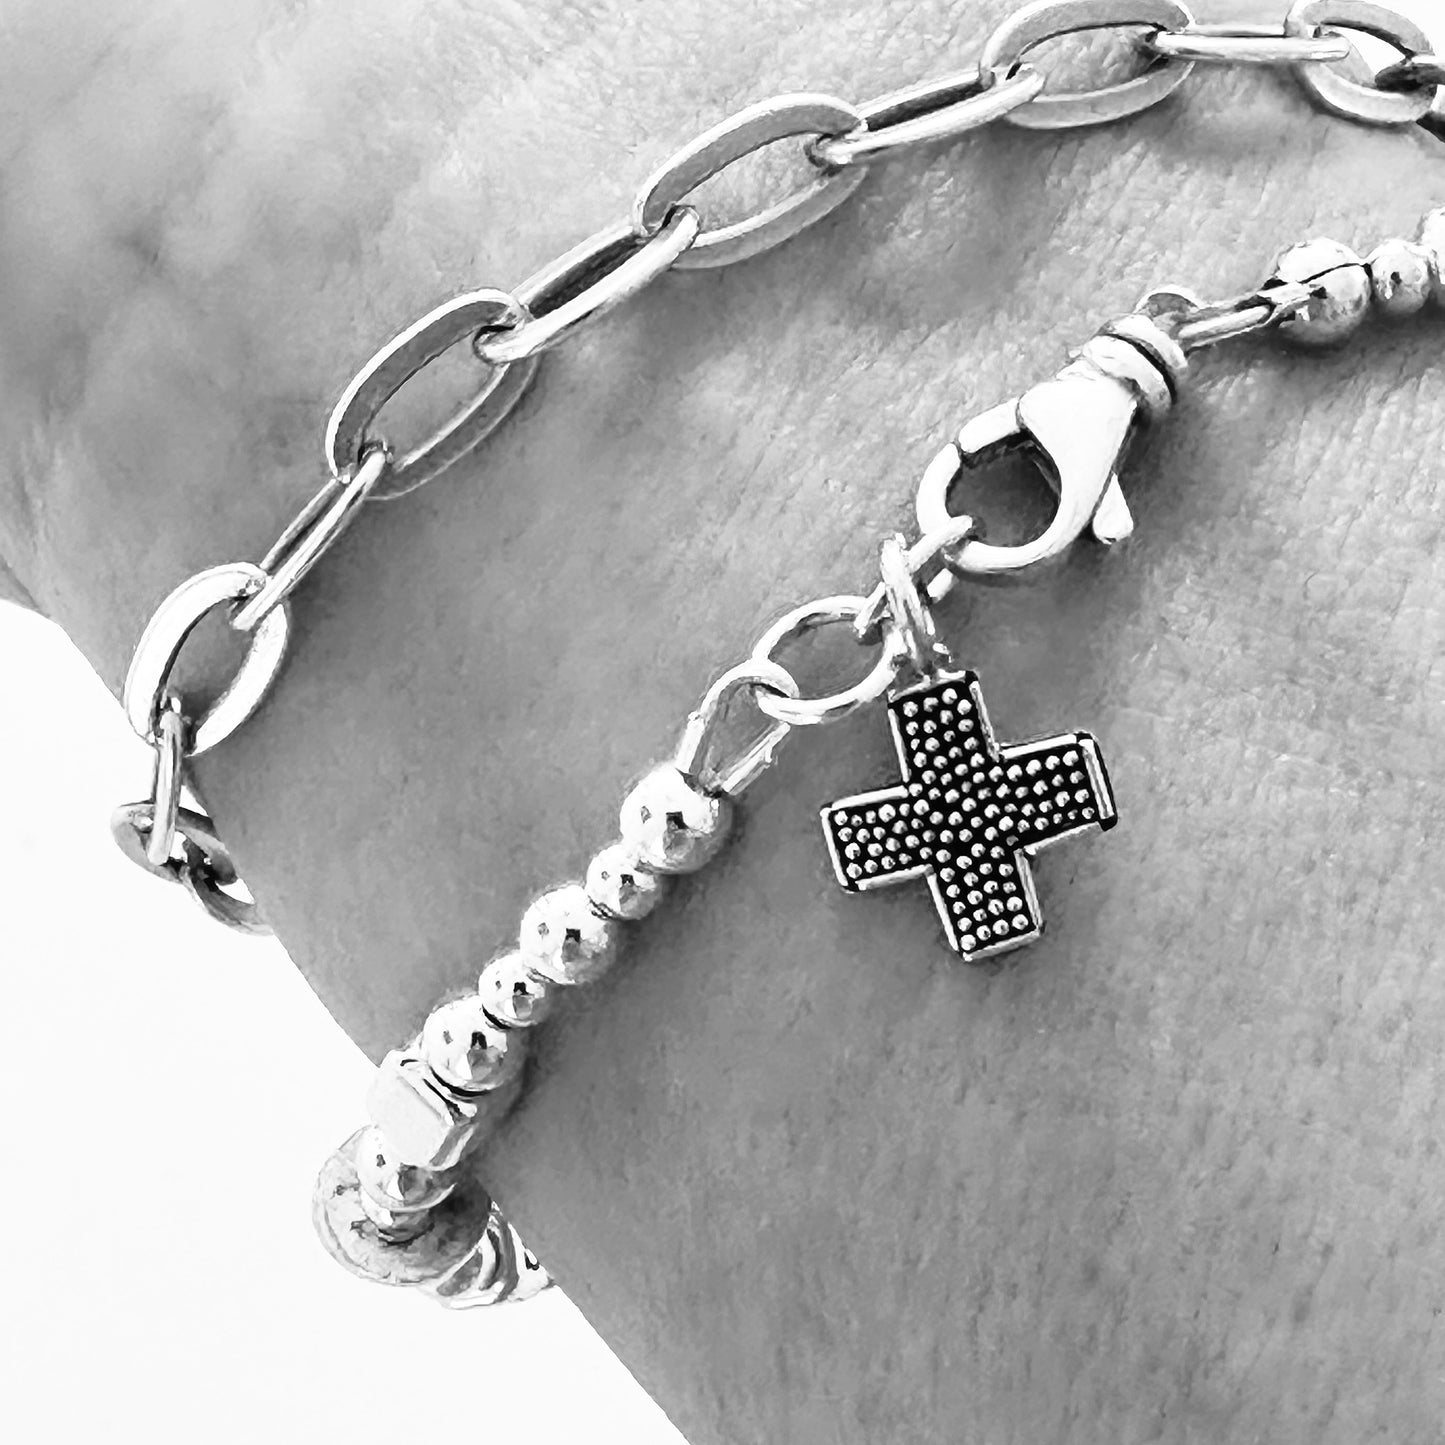 cross charm on Sterling silver message bracelet that spells out bible verse Matthew 28:20, "With You Always" 